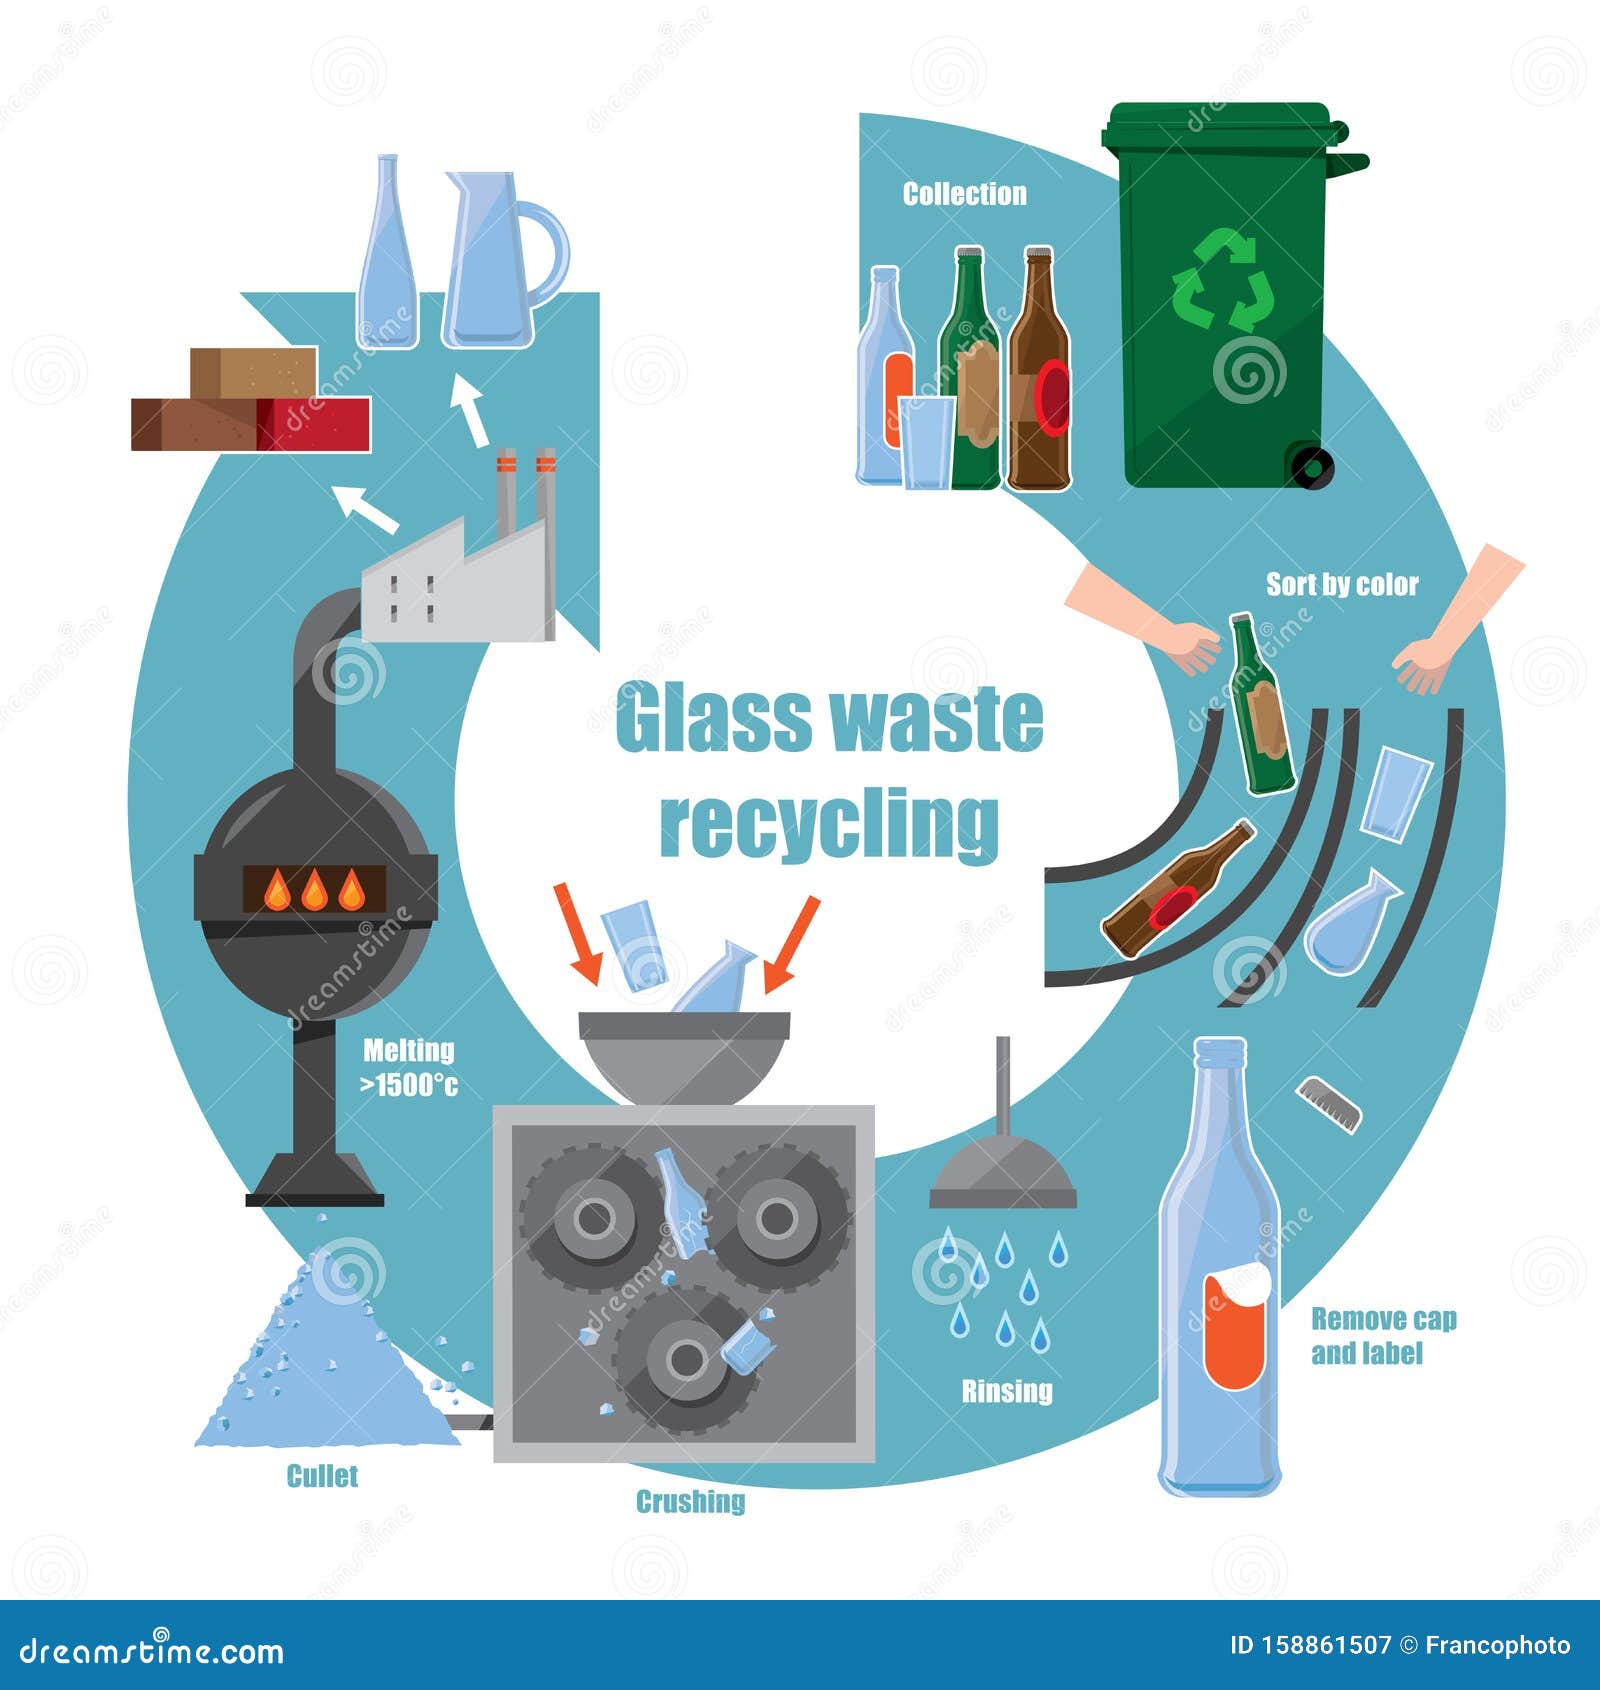 Infographic Diagram of Waste Process Vector - Illustration of steps, graphic: